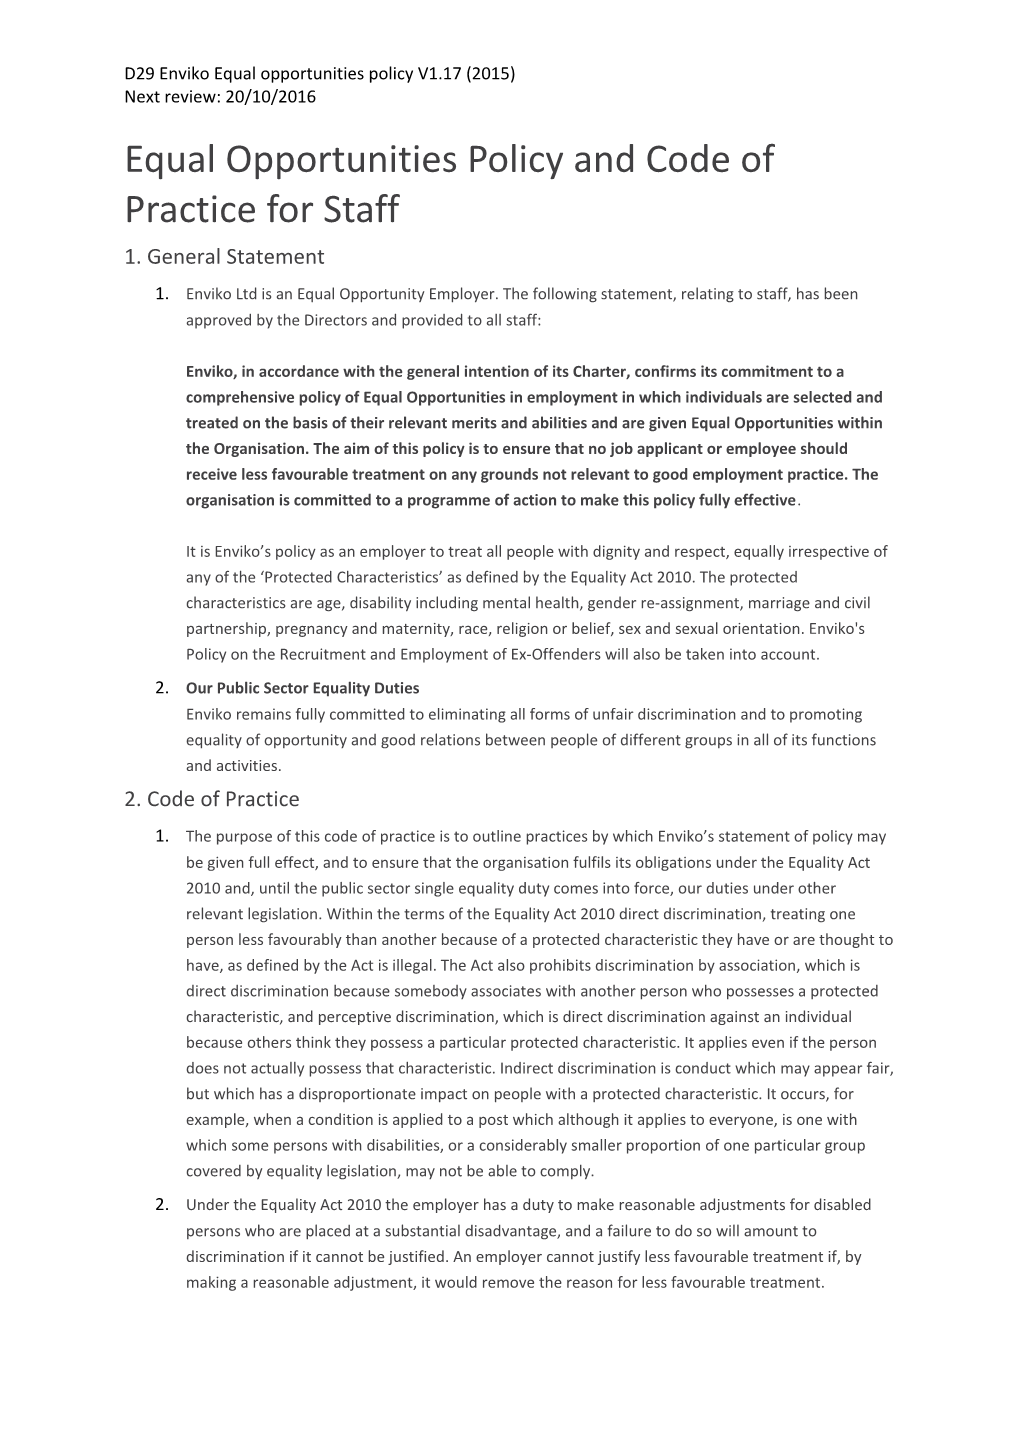 D29 Enviko Equal Opportunities Policy V1.17 (2015)